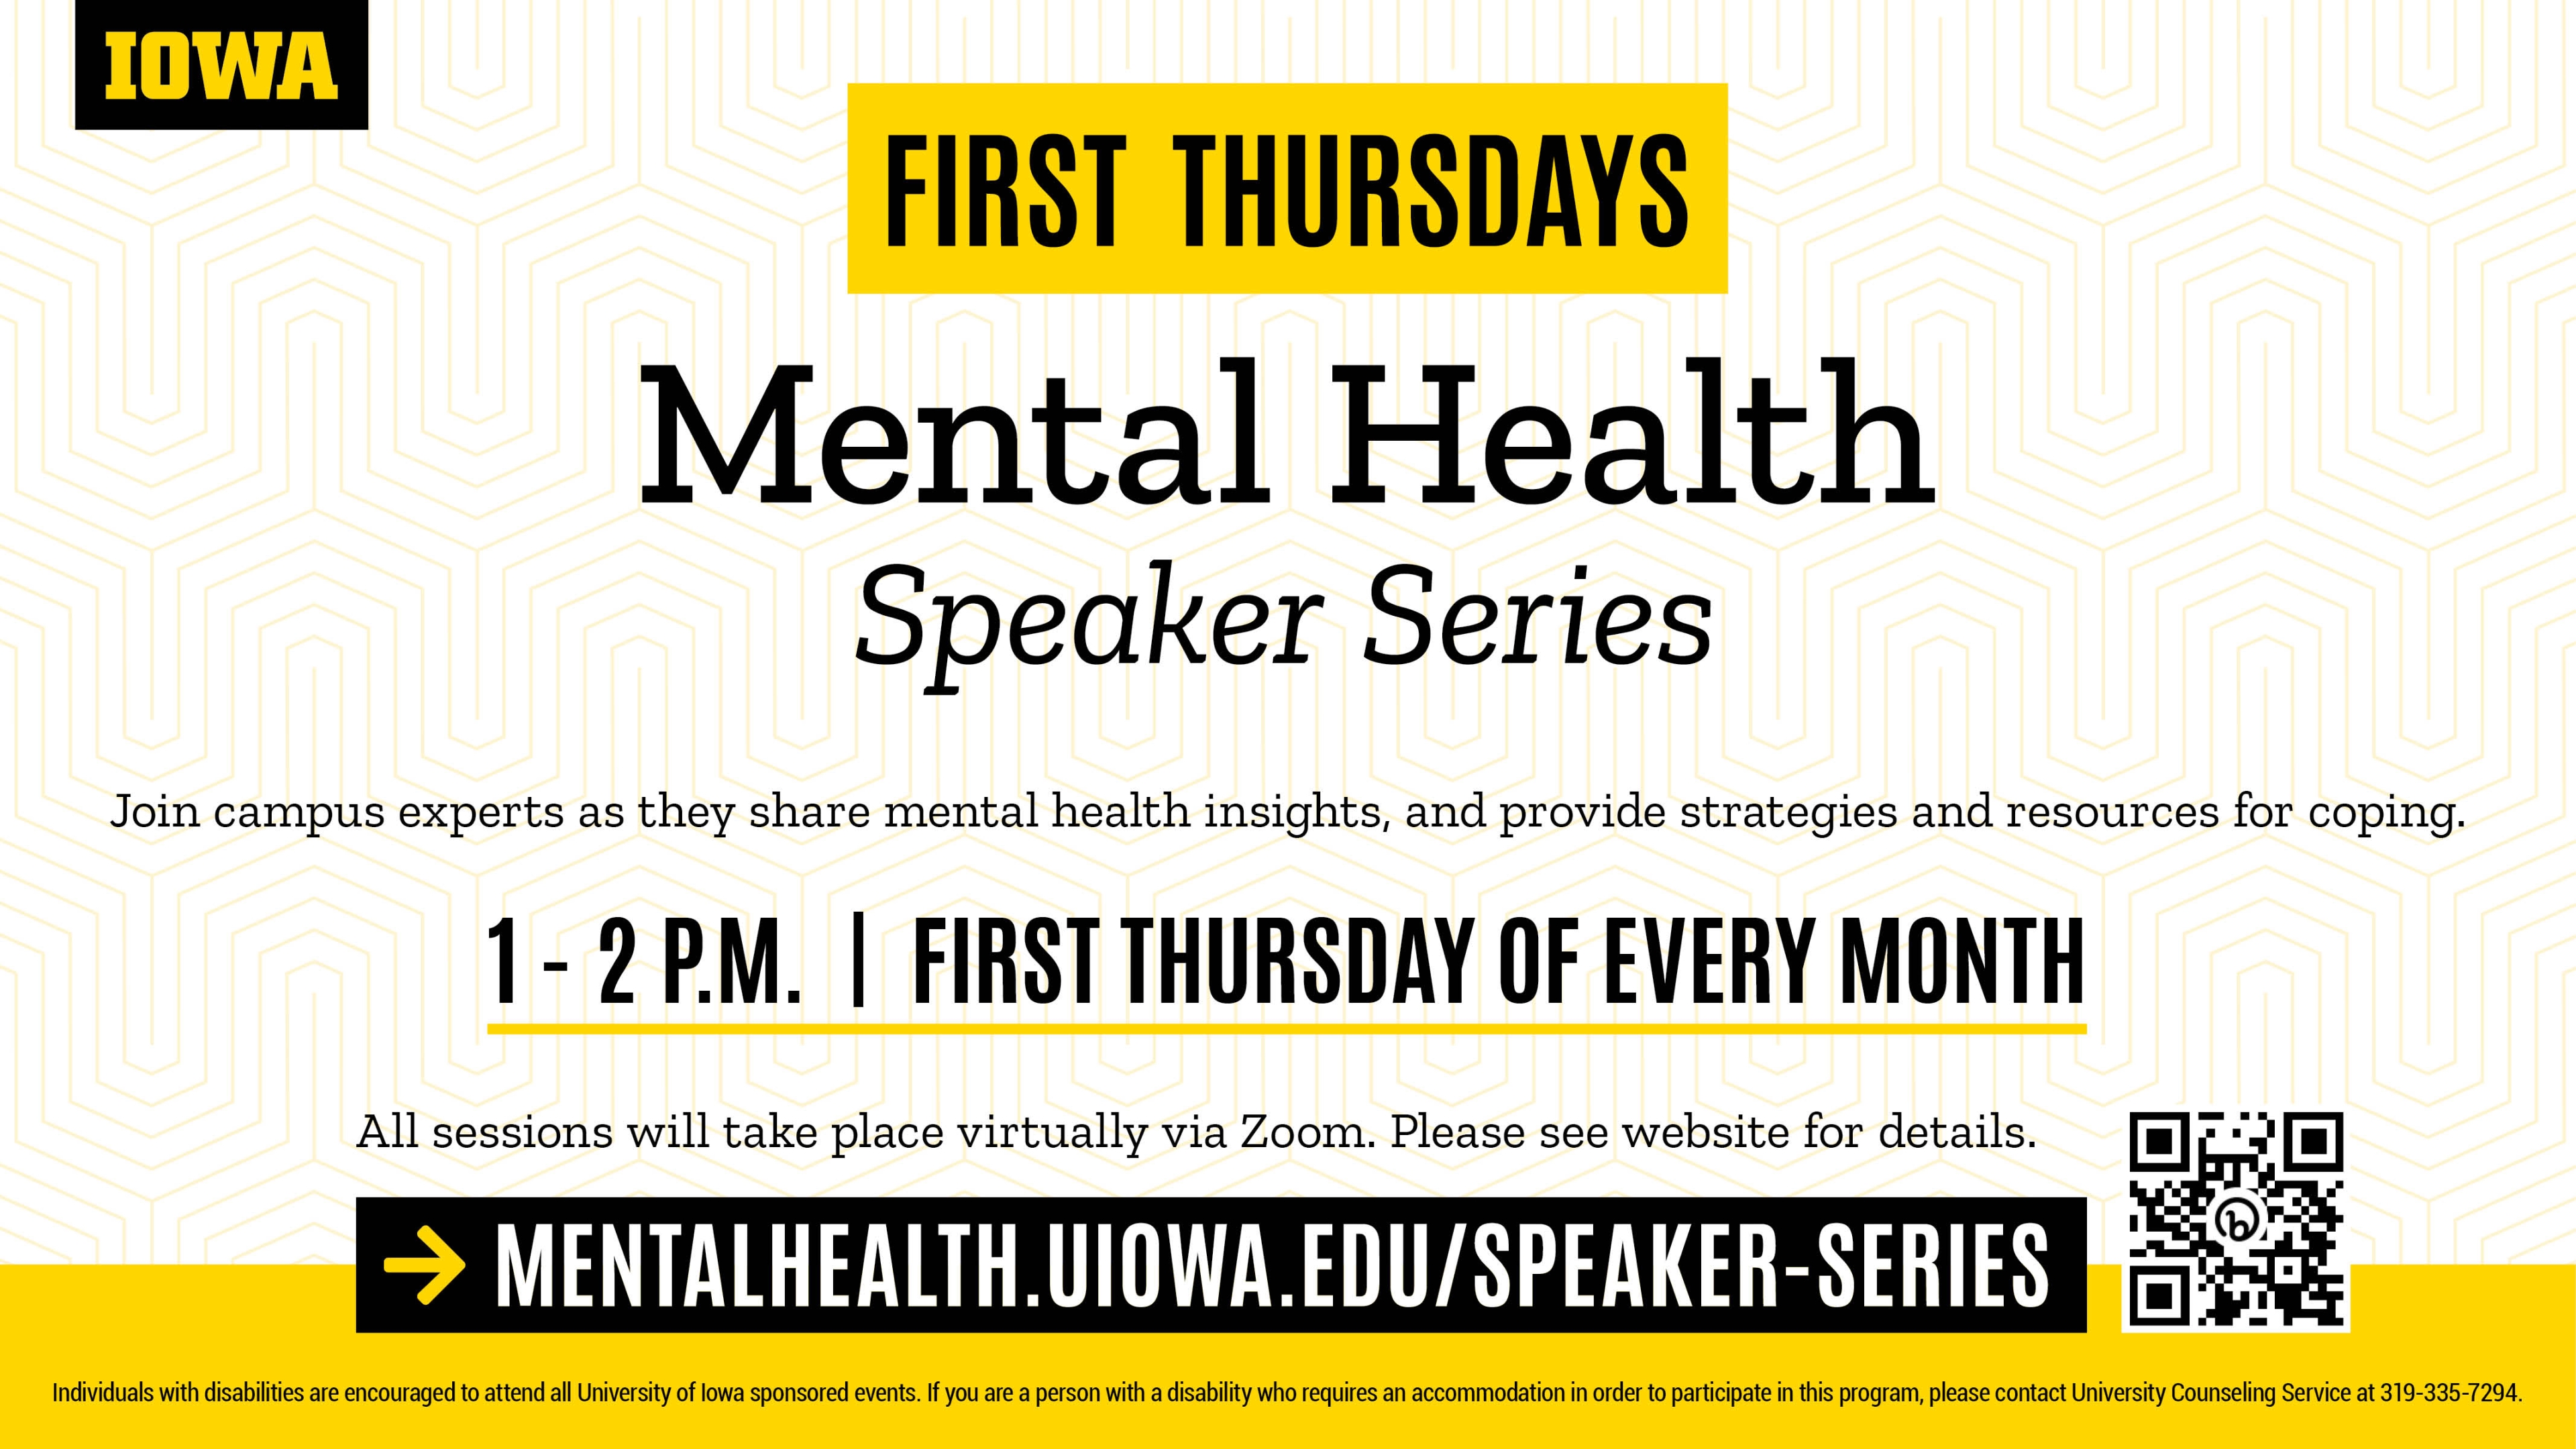 Pictured: Mental Heath Speaker Series Dates and QR code to register